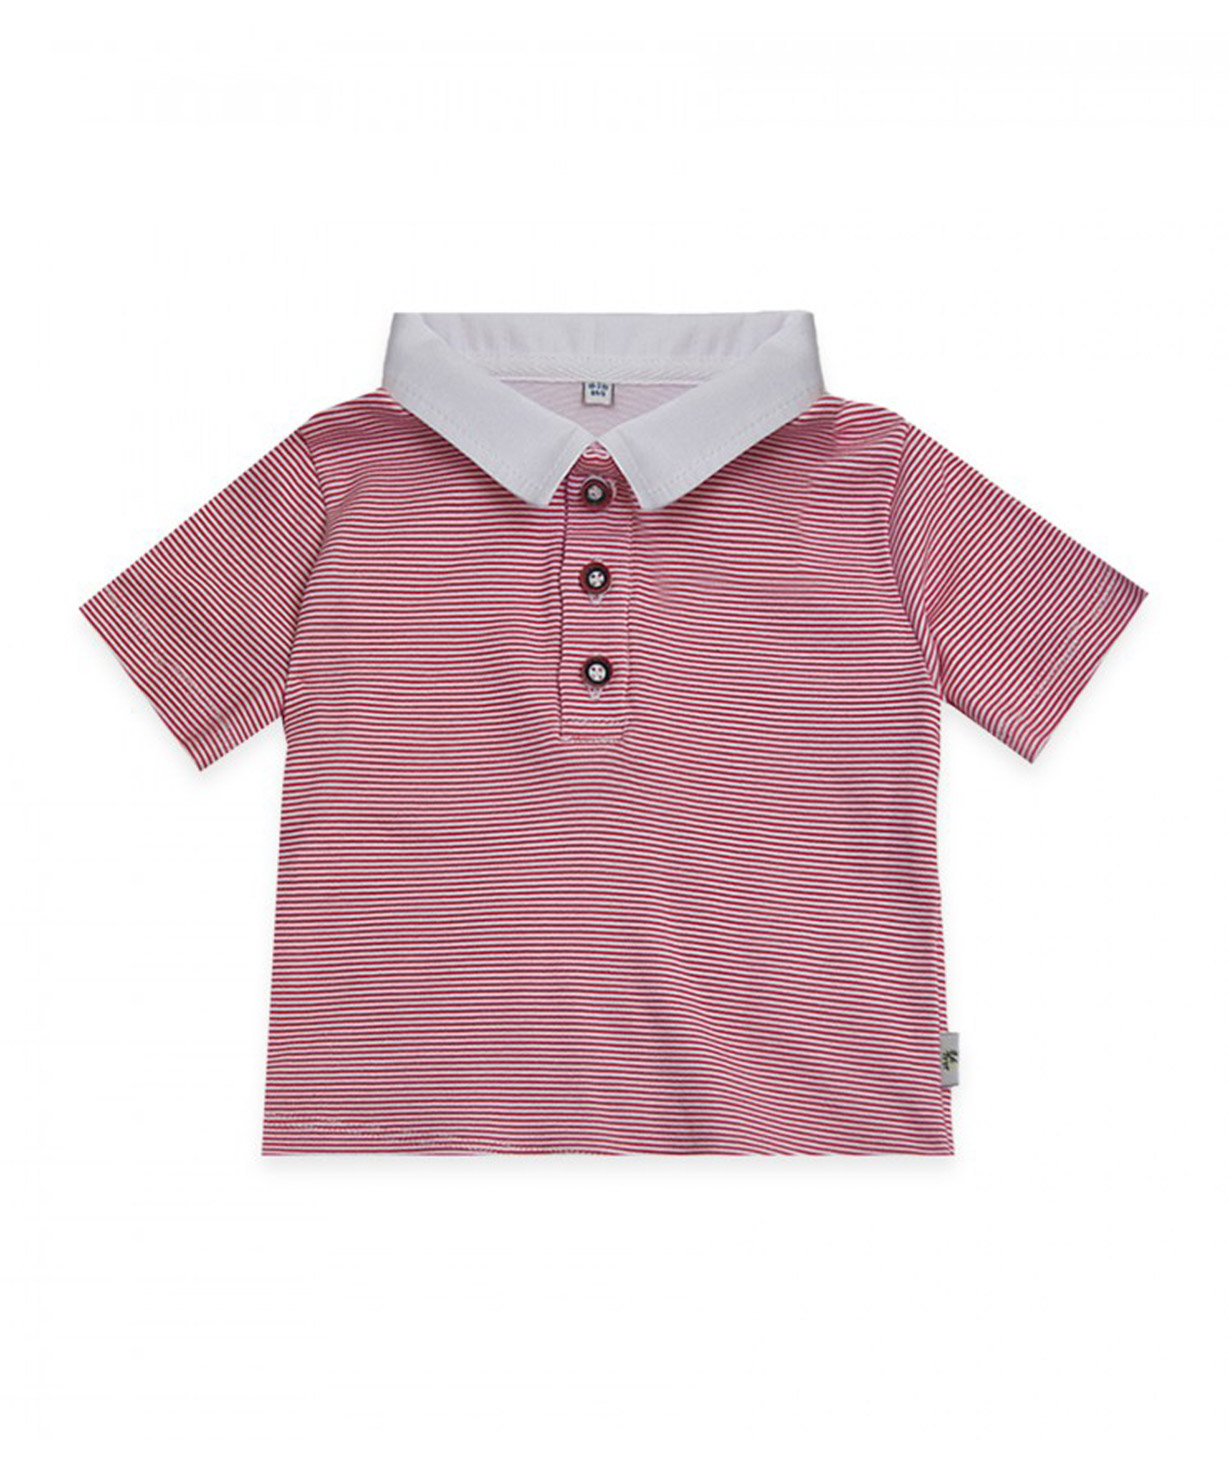 Polo shirt `Lalunz` with white and red